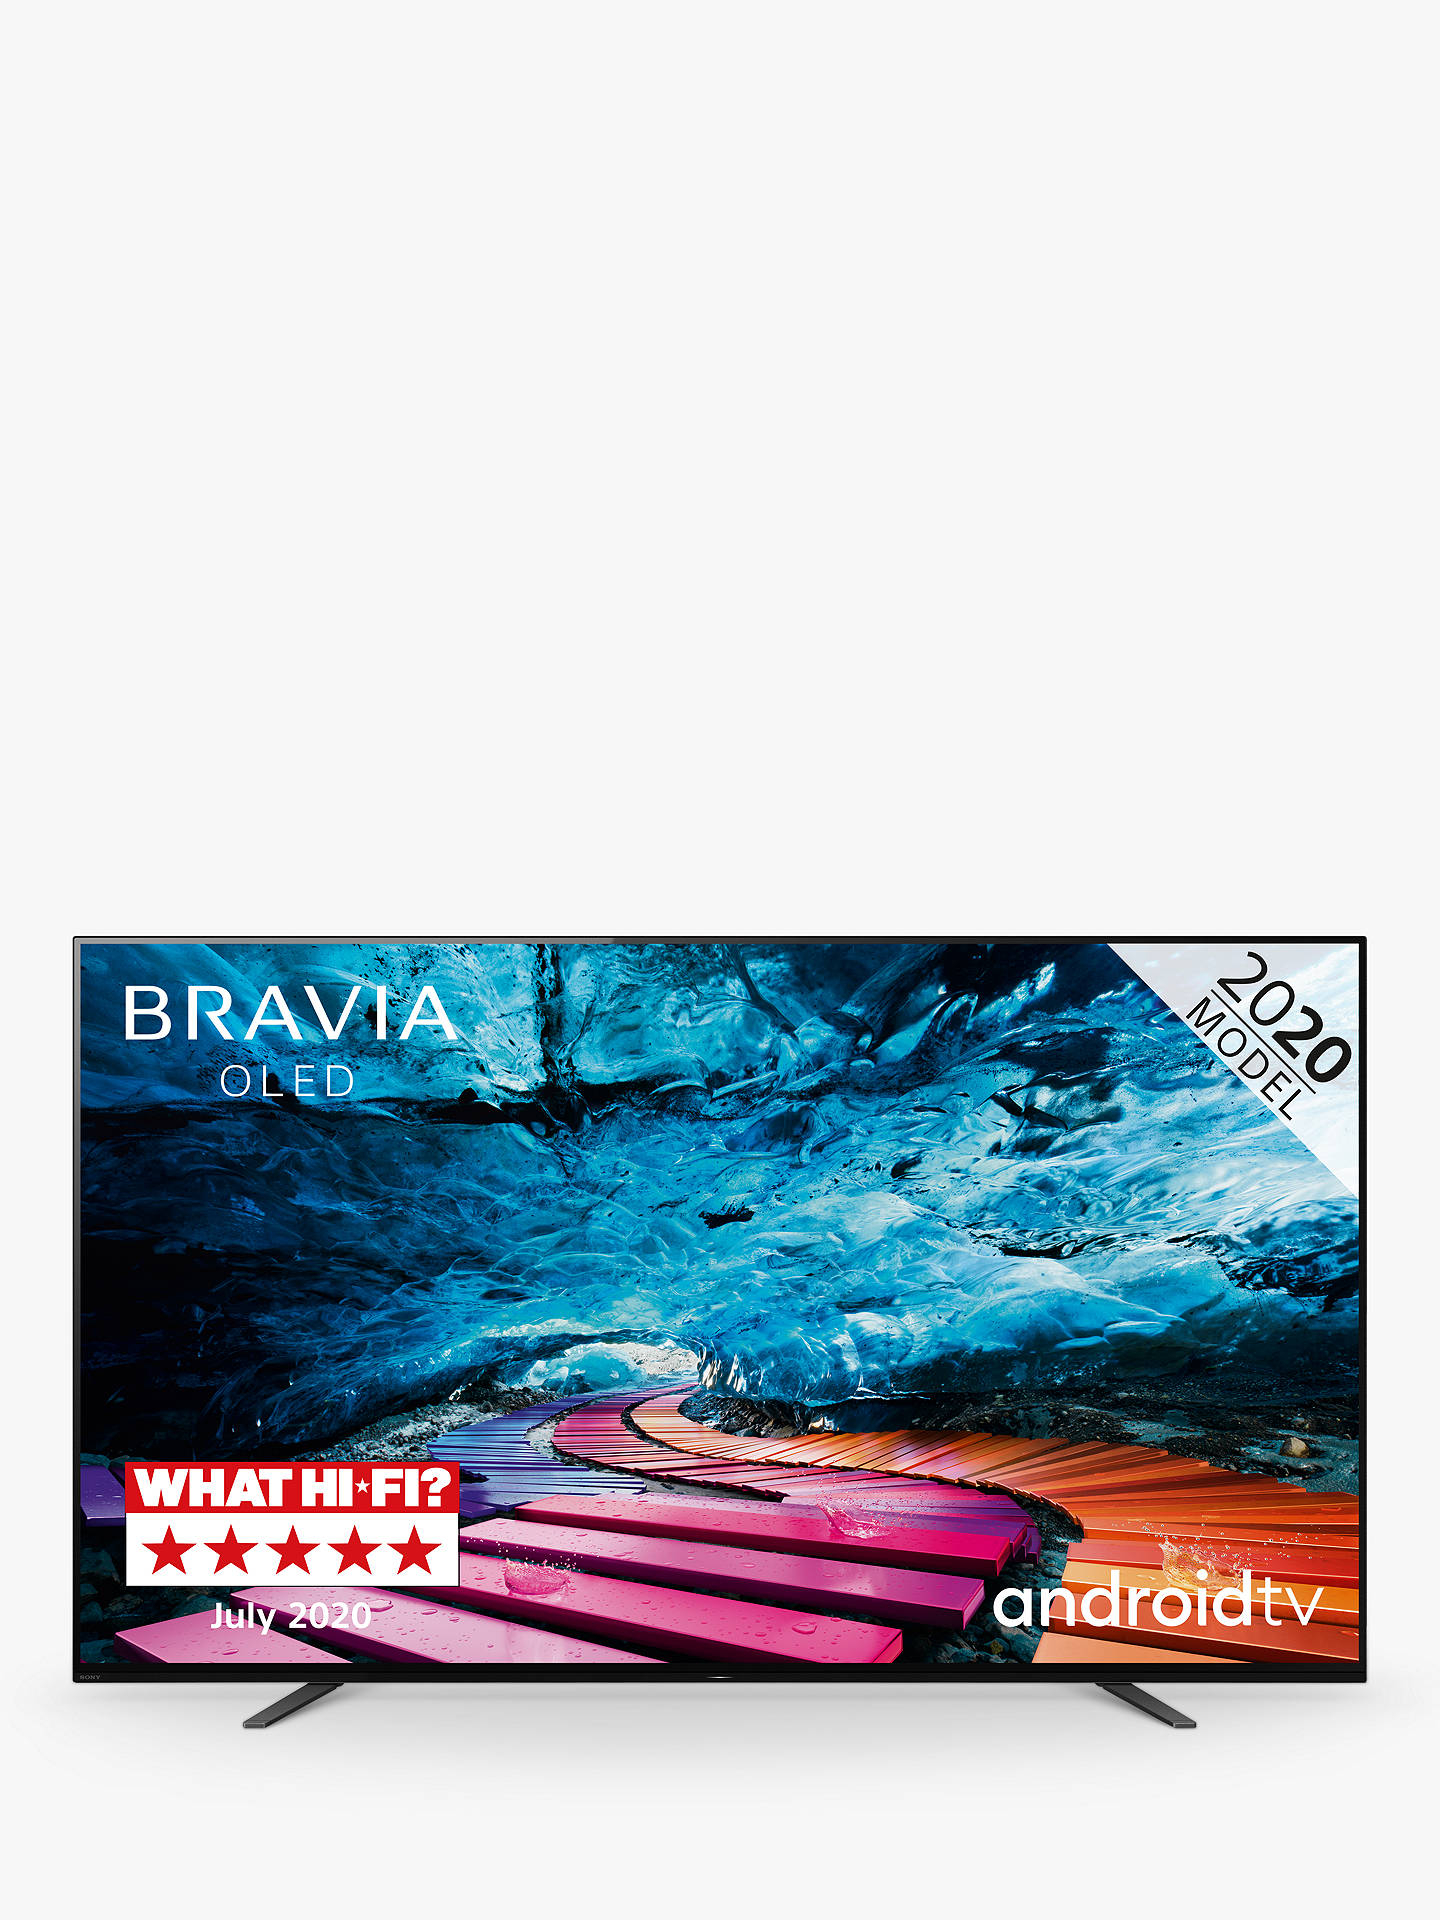 Sony Bravia KD55A8 (2020) OLED HDR 4K Ultra HD Smart Android TV, 55 - £1599 @ John Lewis ...